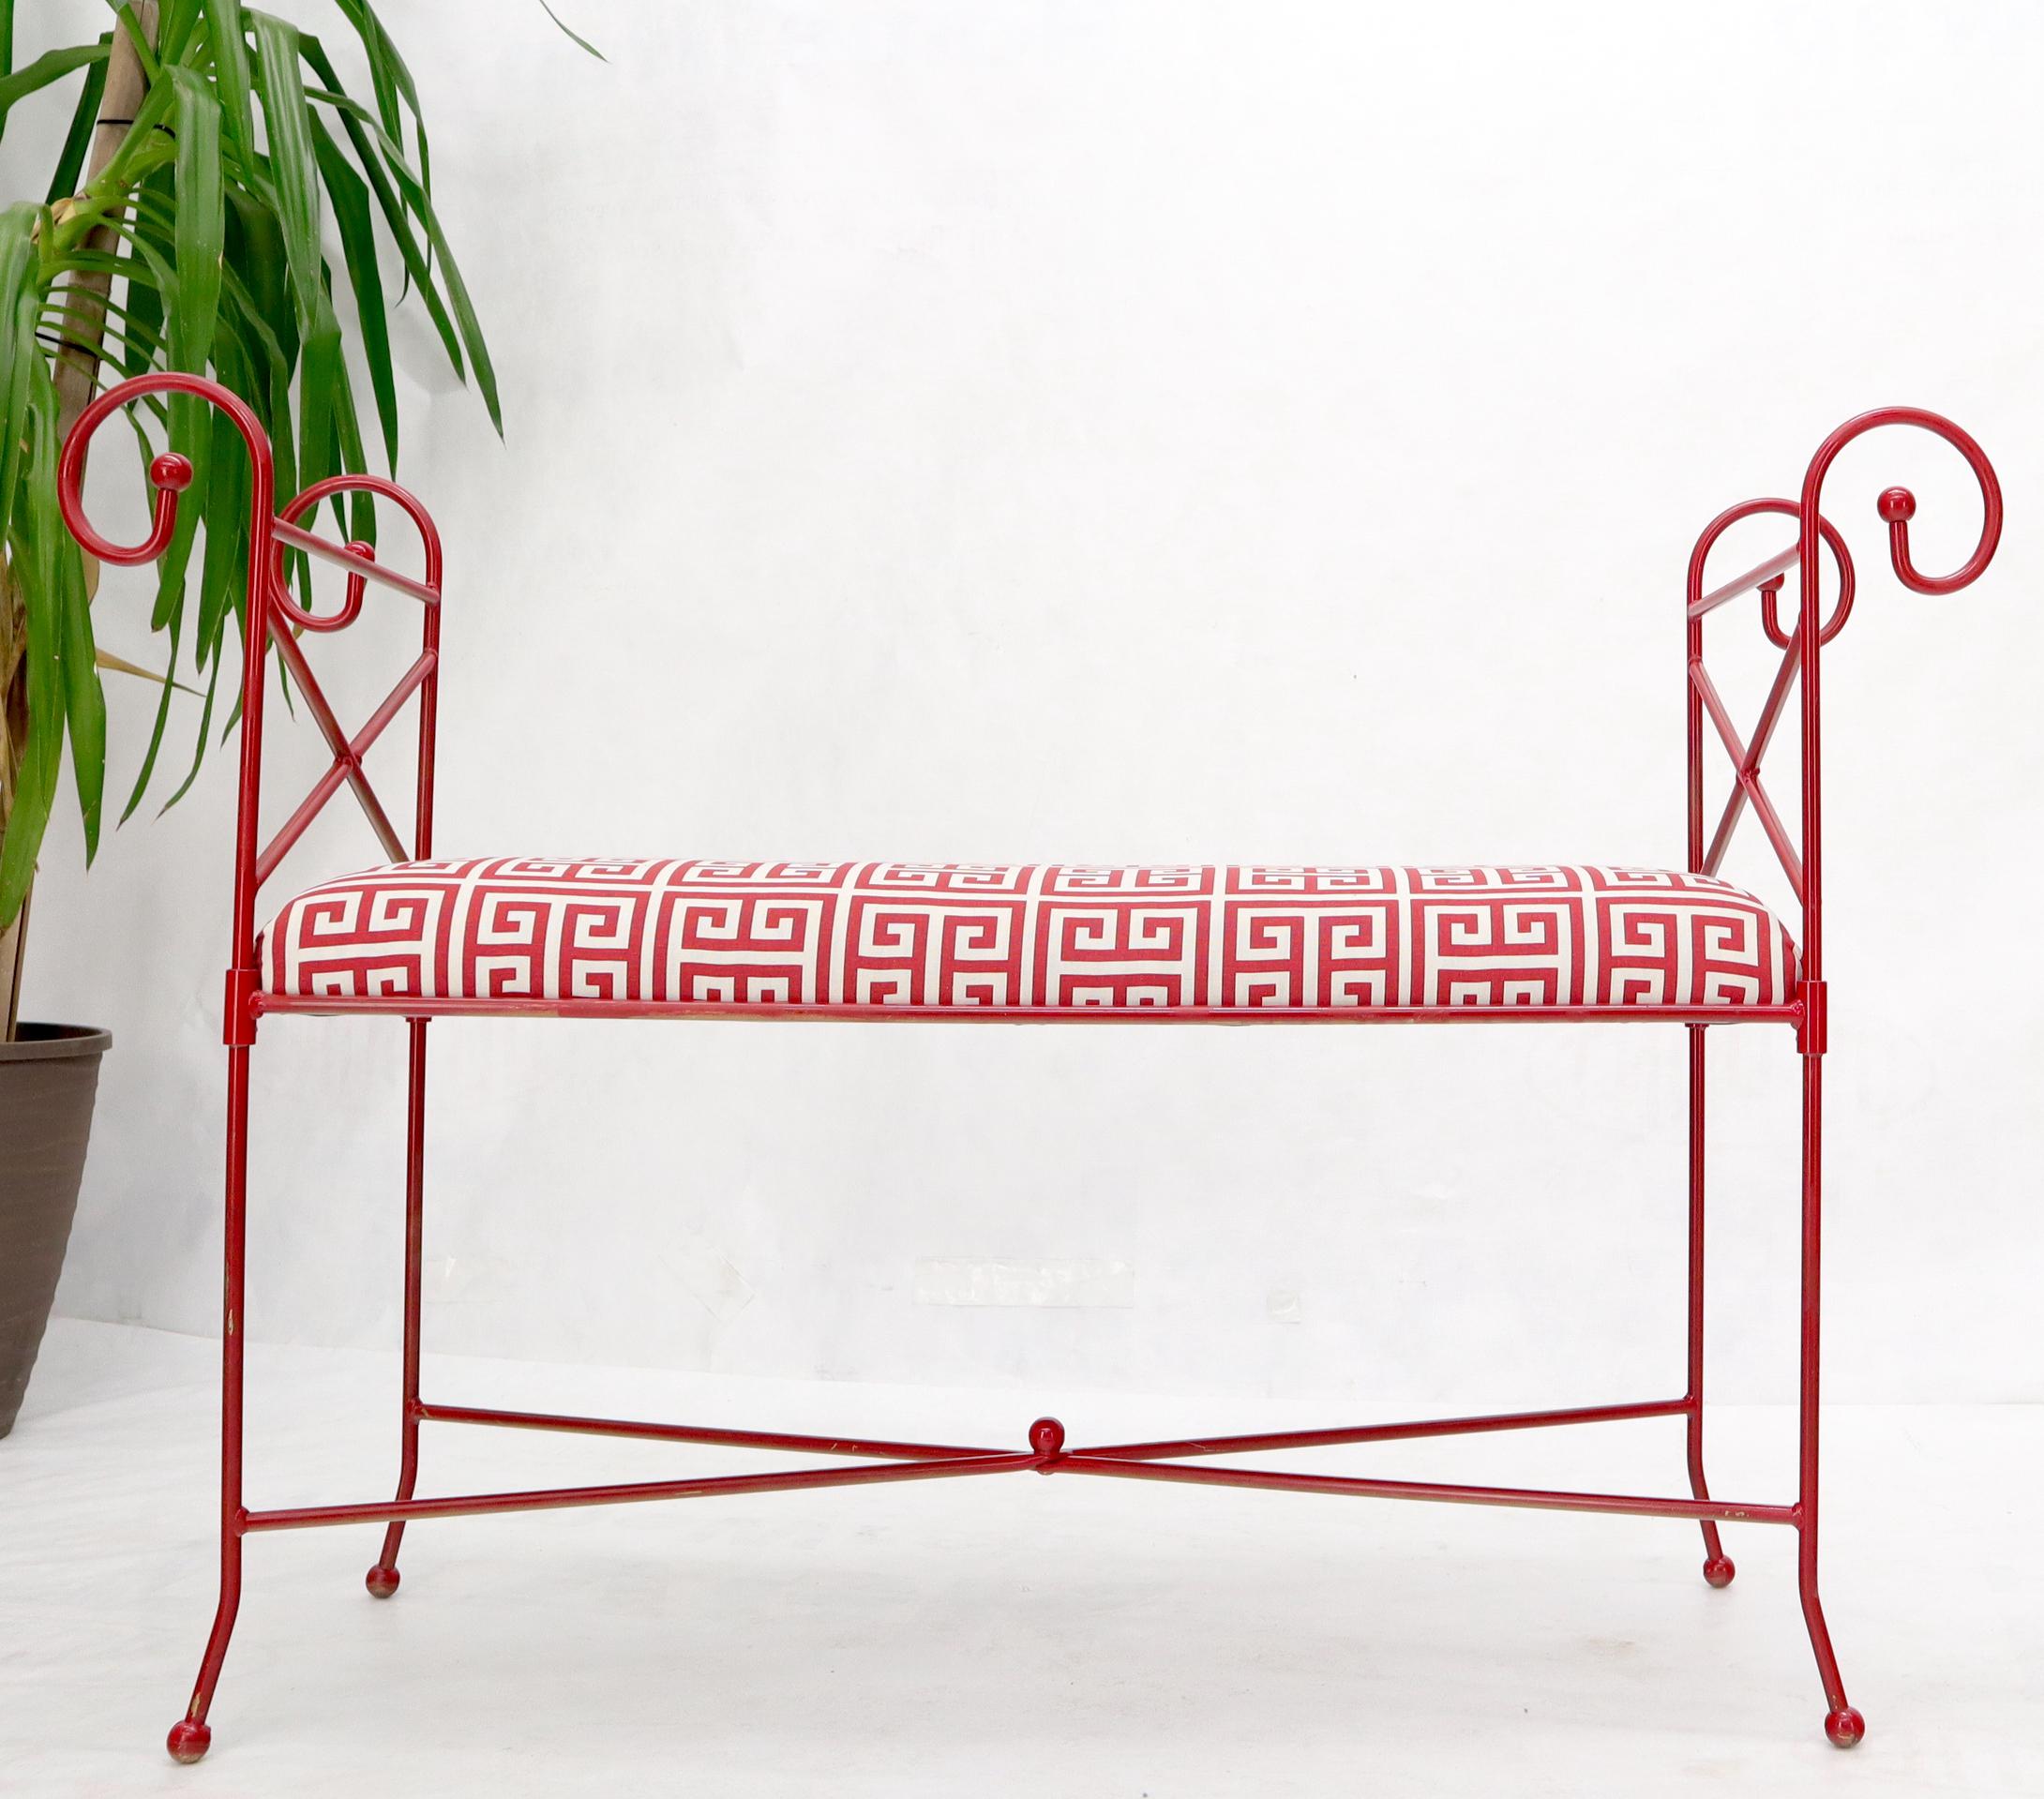 Circa 1960s Wrought Iron Window Bench Fully Restored New Red Lacquer Upholstery For Sale 1